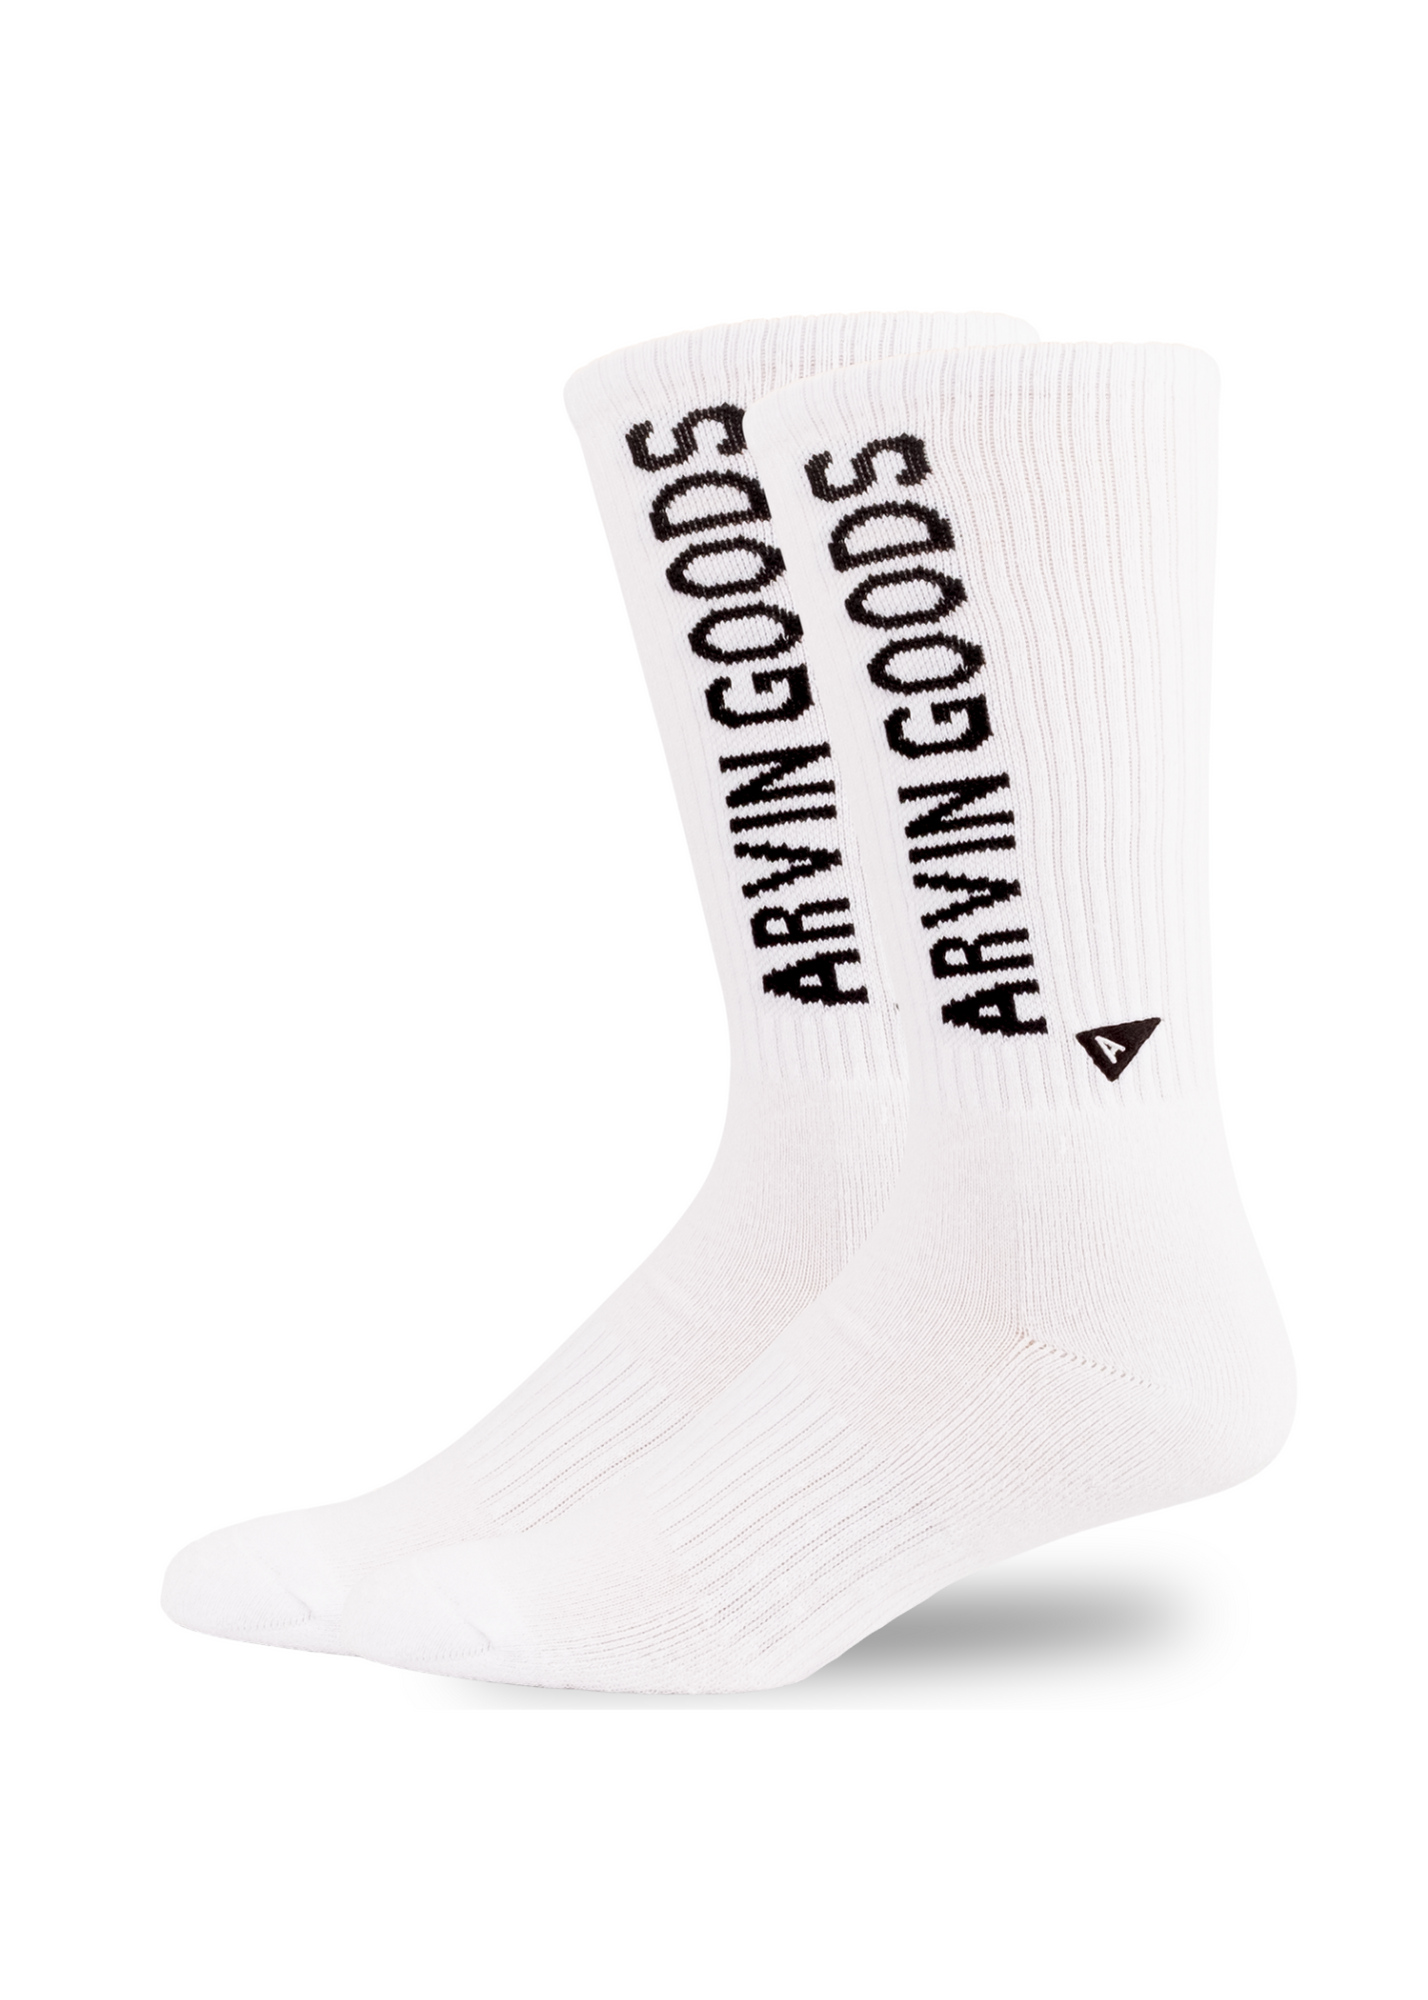 Arvin Goods Tall Crew Sock White with Arvin Goods Lettering in Black